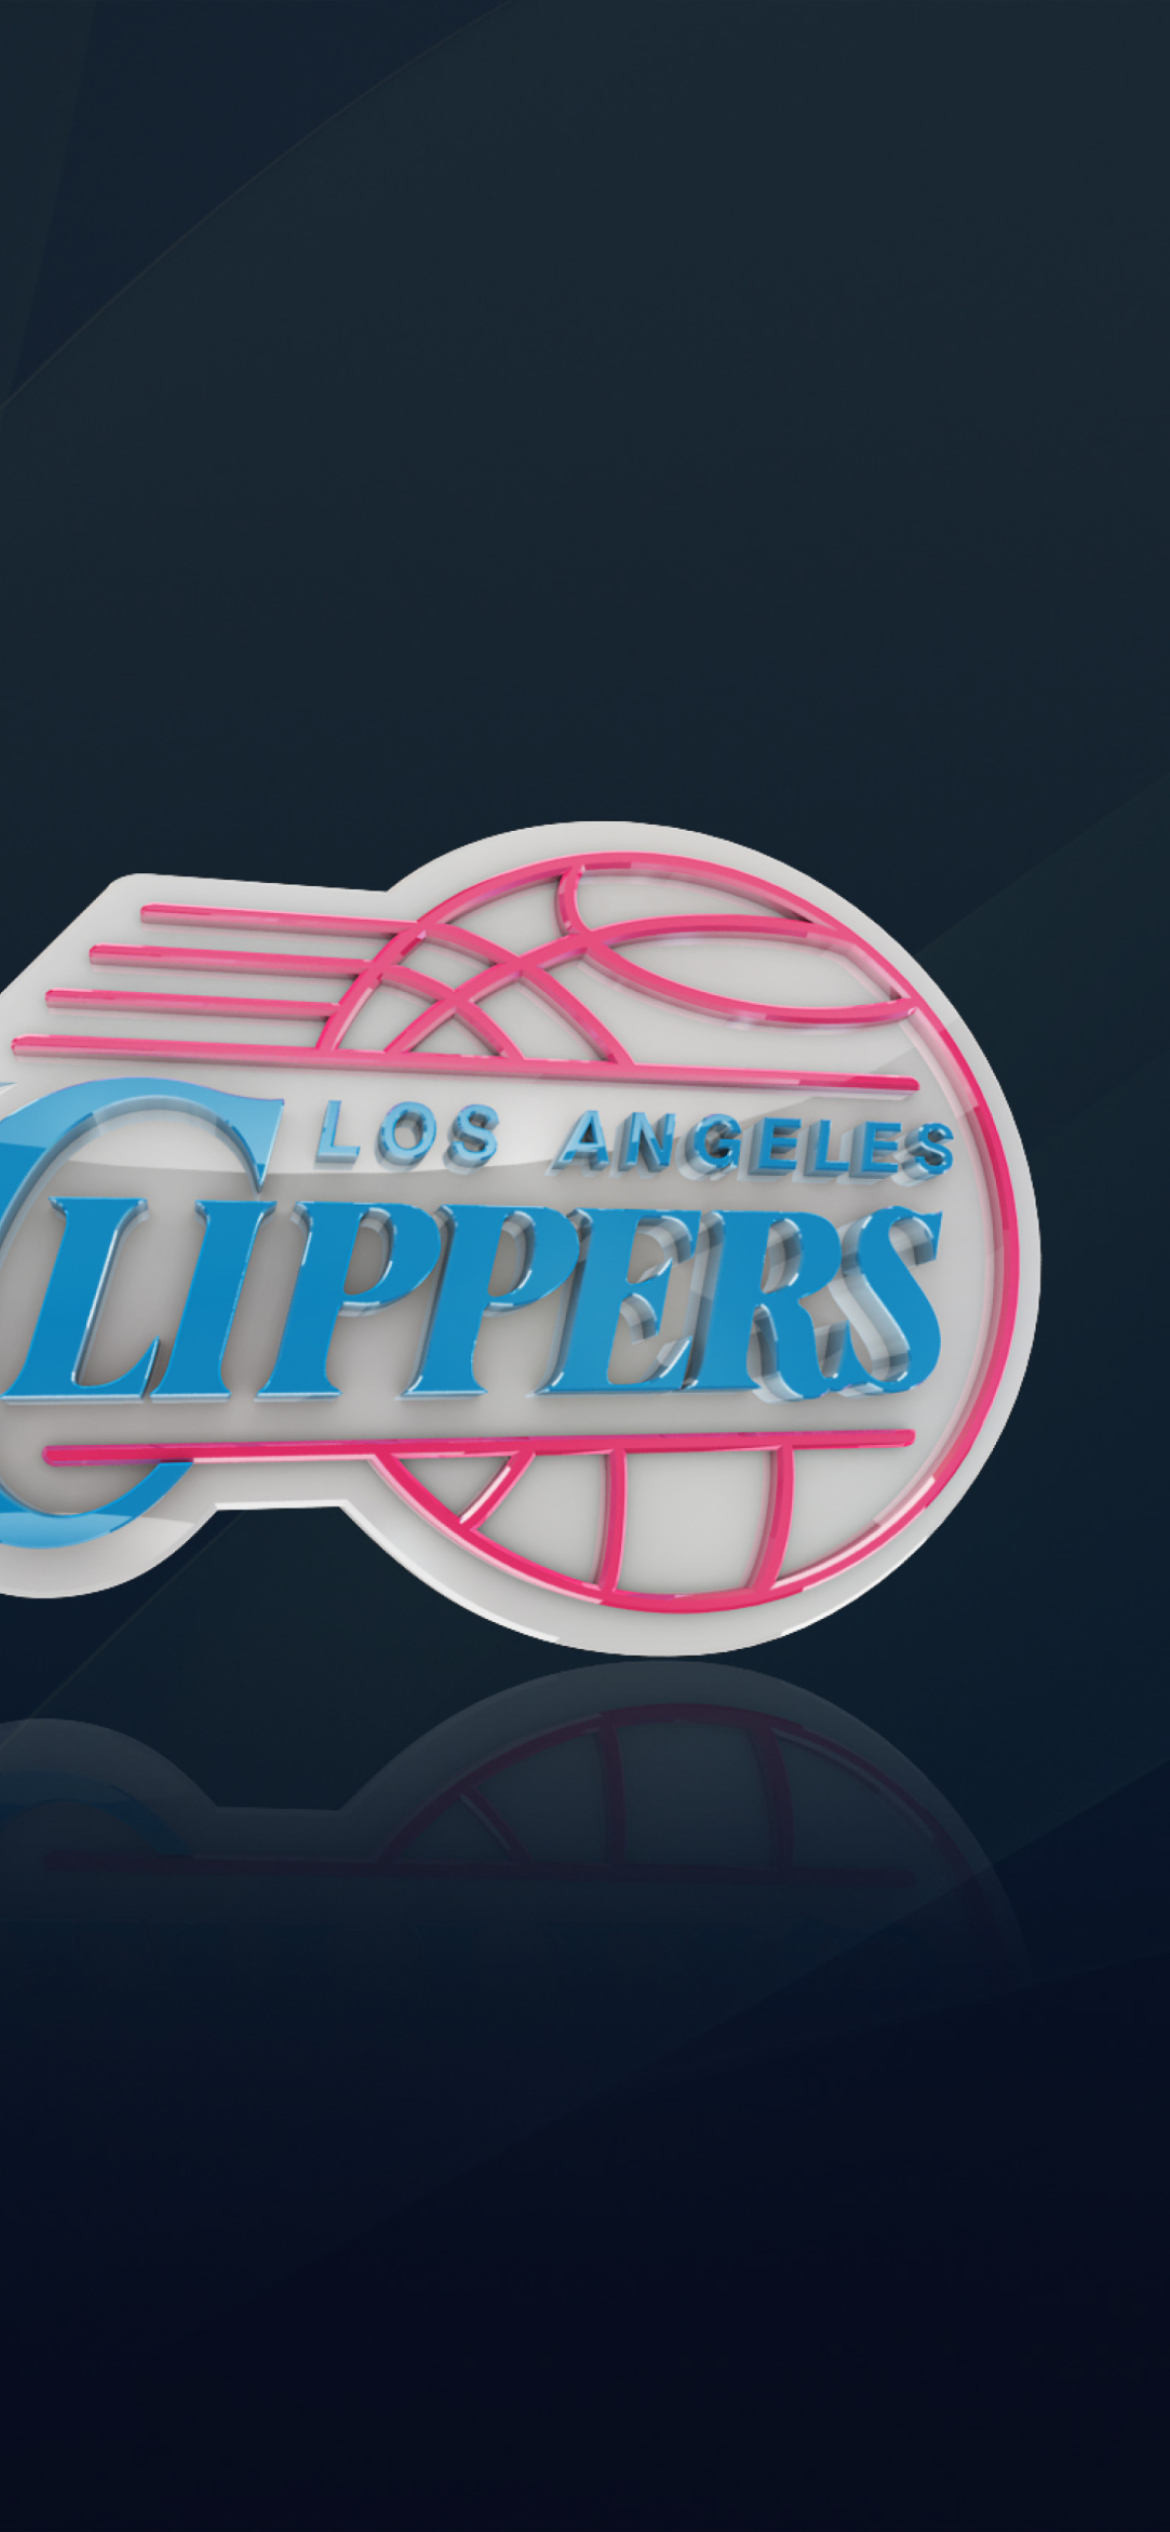 Los Angeles Clippers screenshot #1 1170x2532